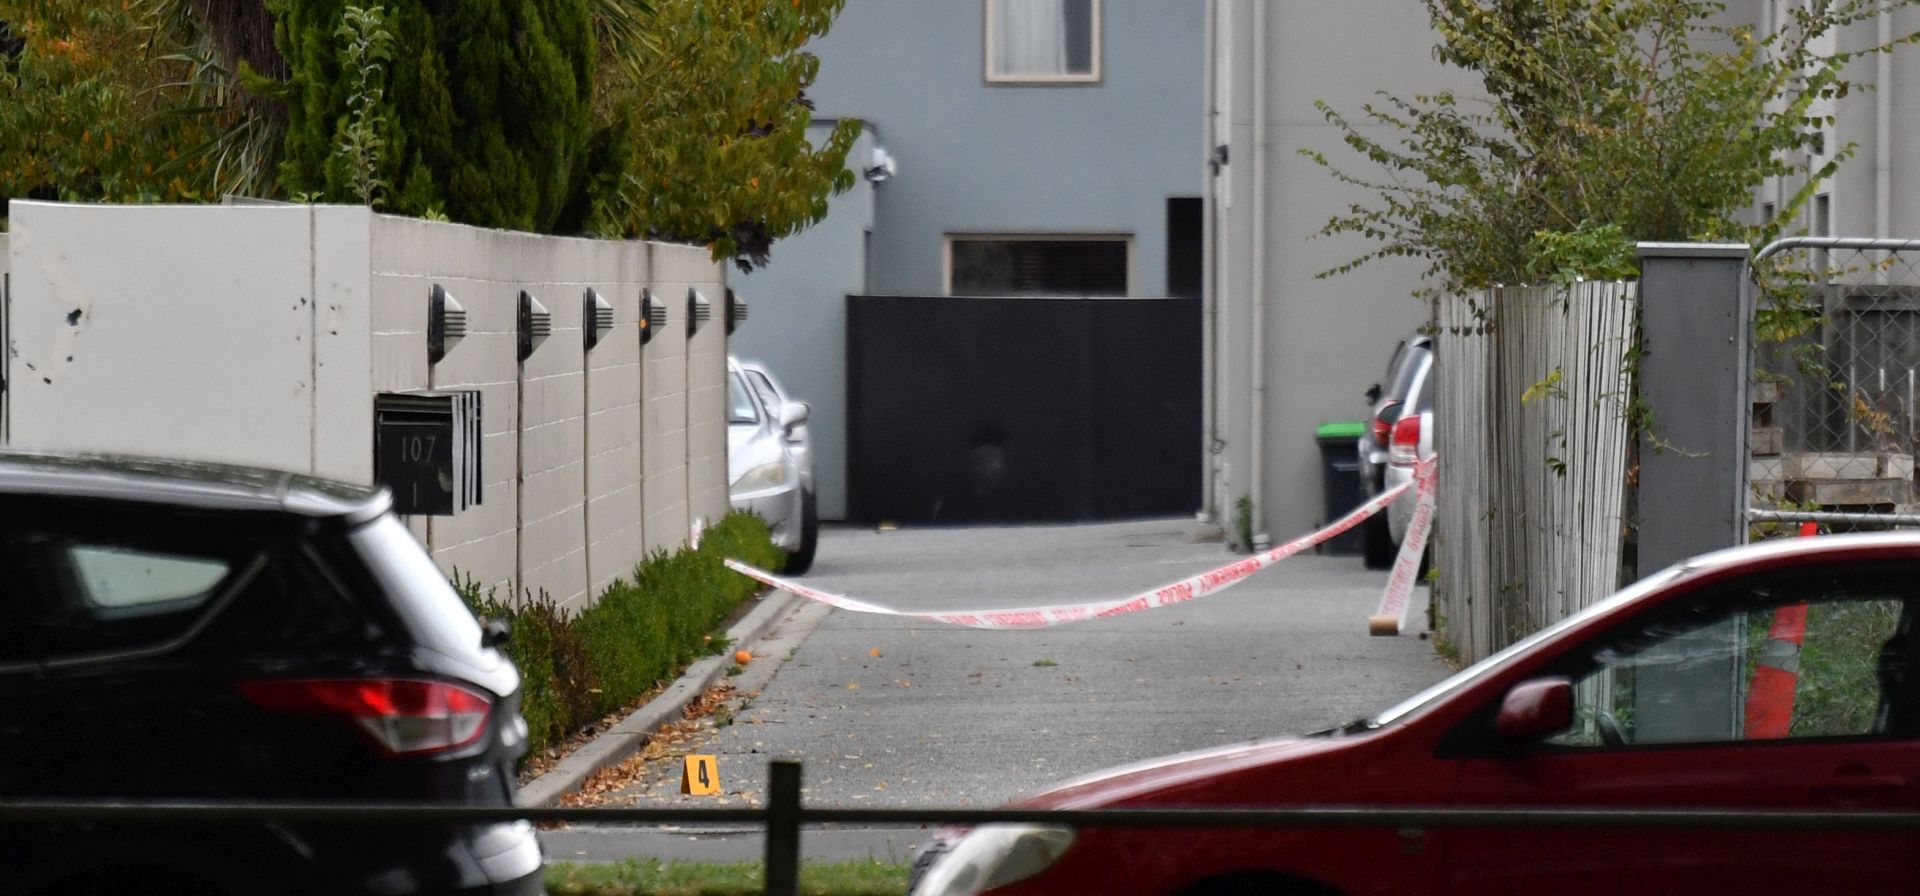 epa07441317 The laneway where the gunman parked his car next to the Al Noor Masjid on Deans Rd in Christchurch, New Zealand, 16 March 2019. A gunman killed 49 worshippers at the Al Noor Masjid and Linwood Masjid on 15 March. The 28-year-old Australian suspect, Brenton Tarrant, appeared in court on 16 March and was charged with murder.  EPA/MICK TSIKAS  AUSTRALIA AND NEW ZEALAND OUT